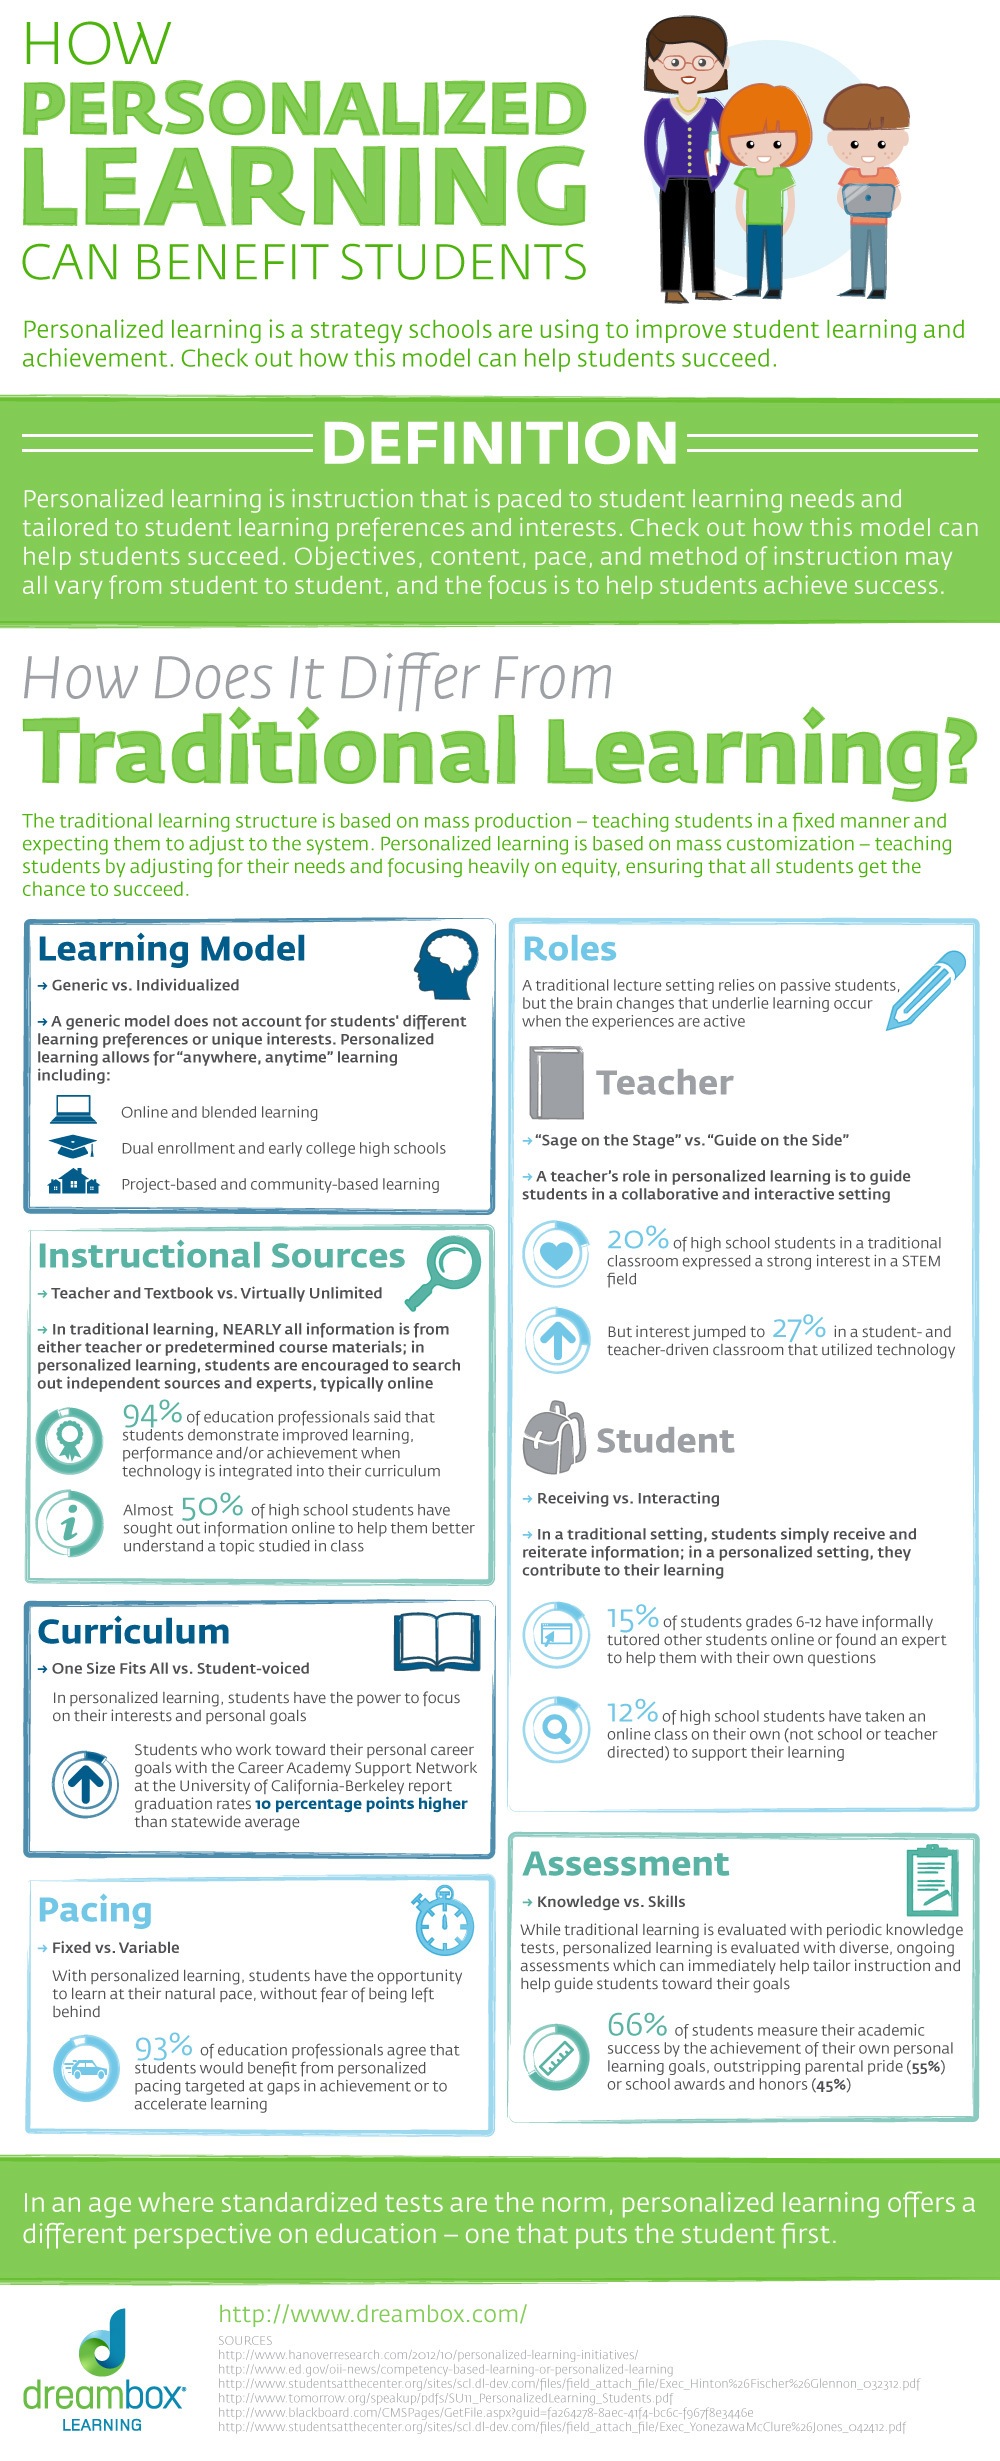 How Personalized Learning Can Benefit Students Infographic